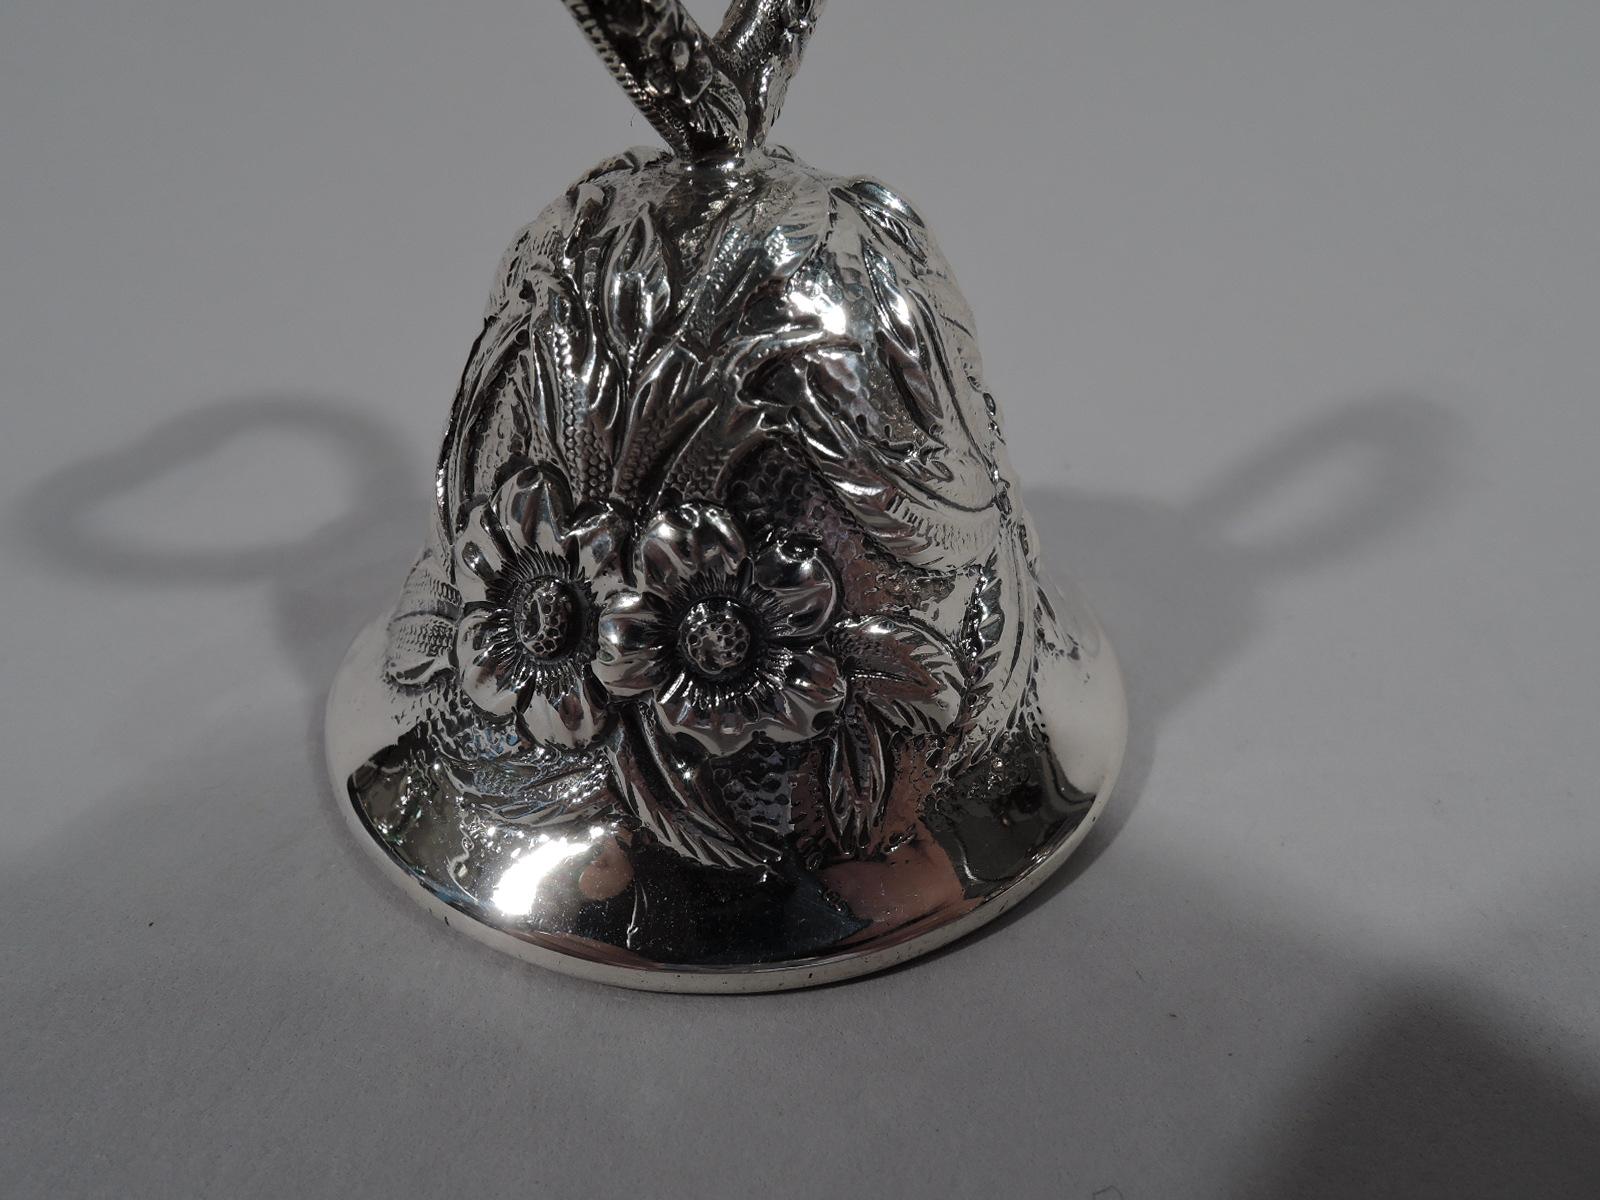 Victorian Kirk Repousse Sterling Silver Bell with Lovey-Dovey Heart Handle